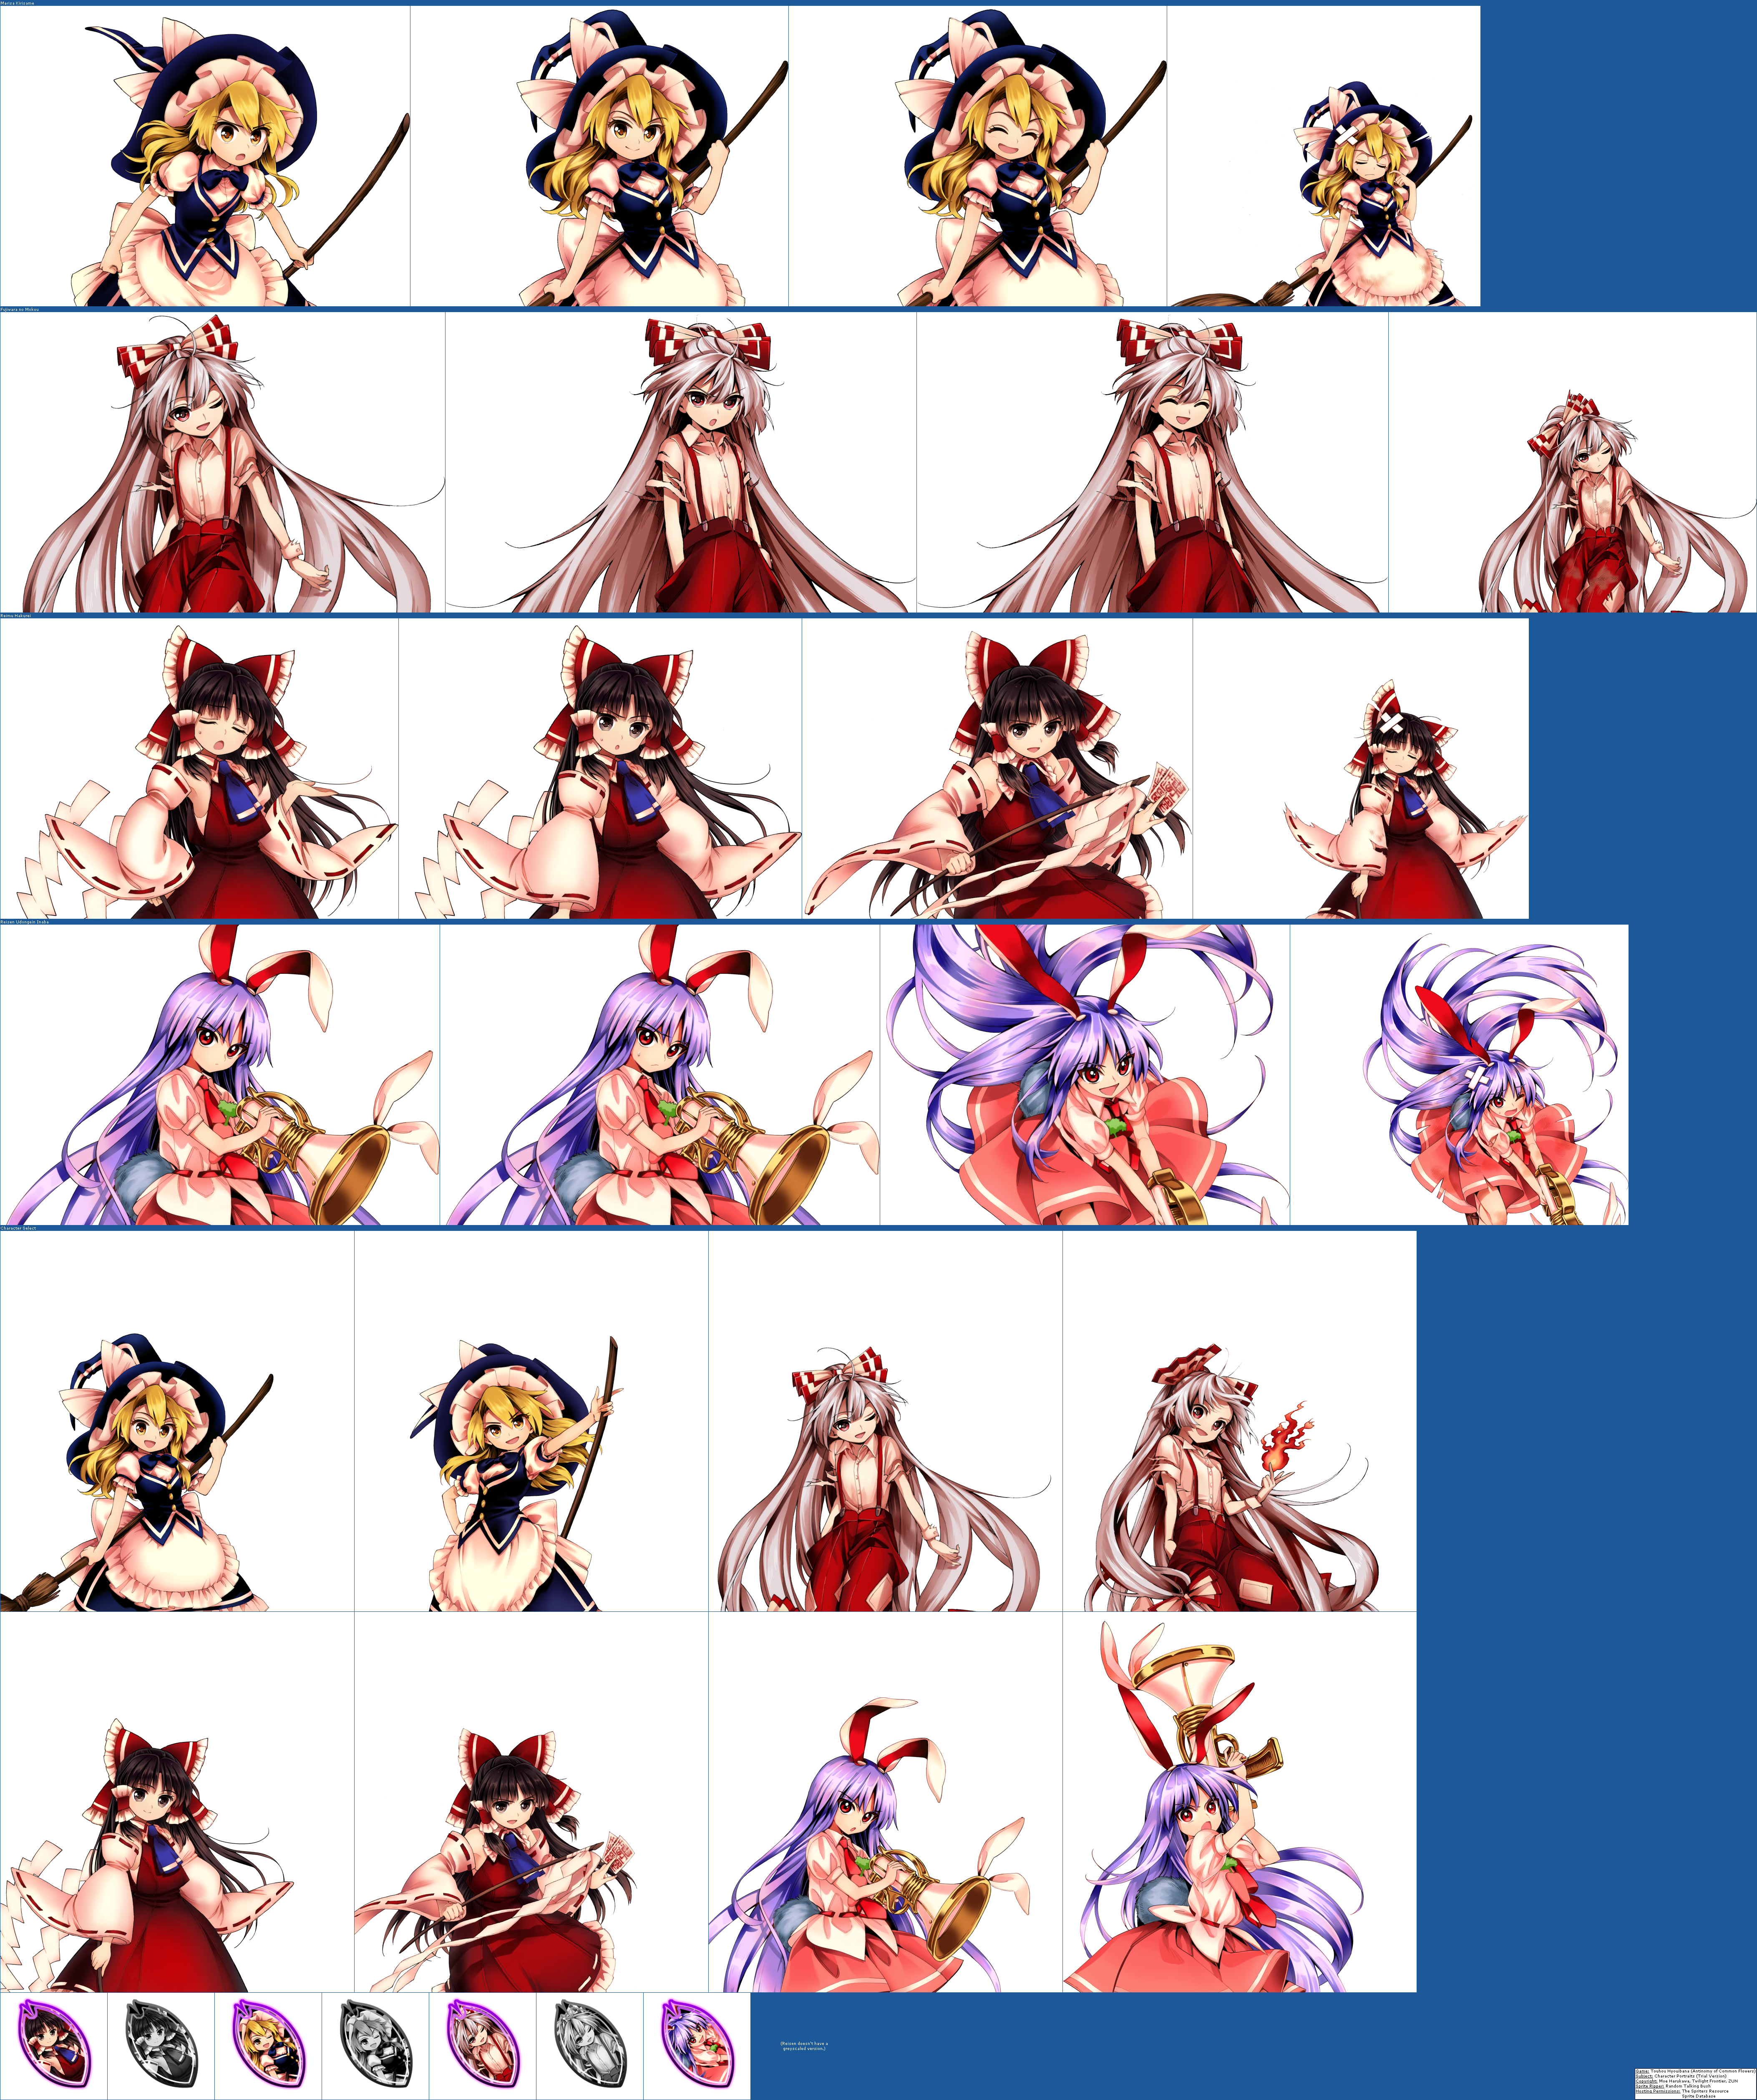 Touhou Hyouibana (Antinomy of Common Flowers) - Character Portraits (Trial Version)